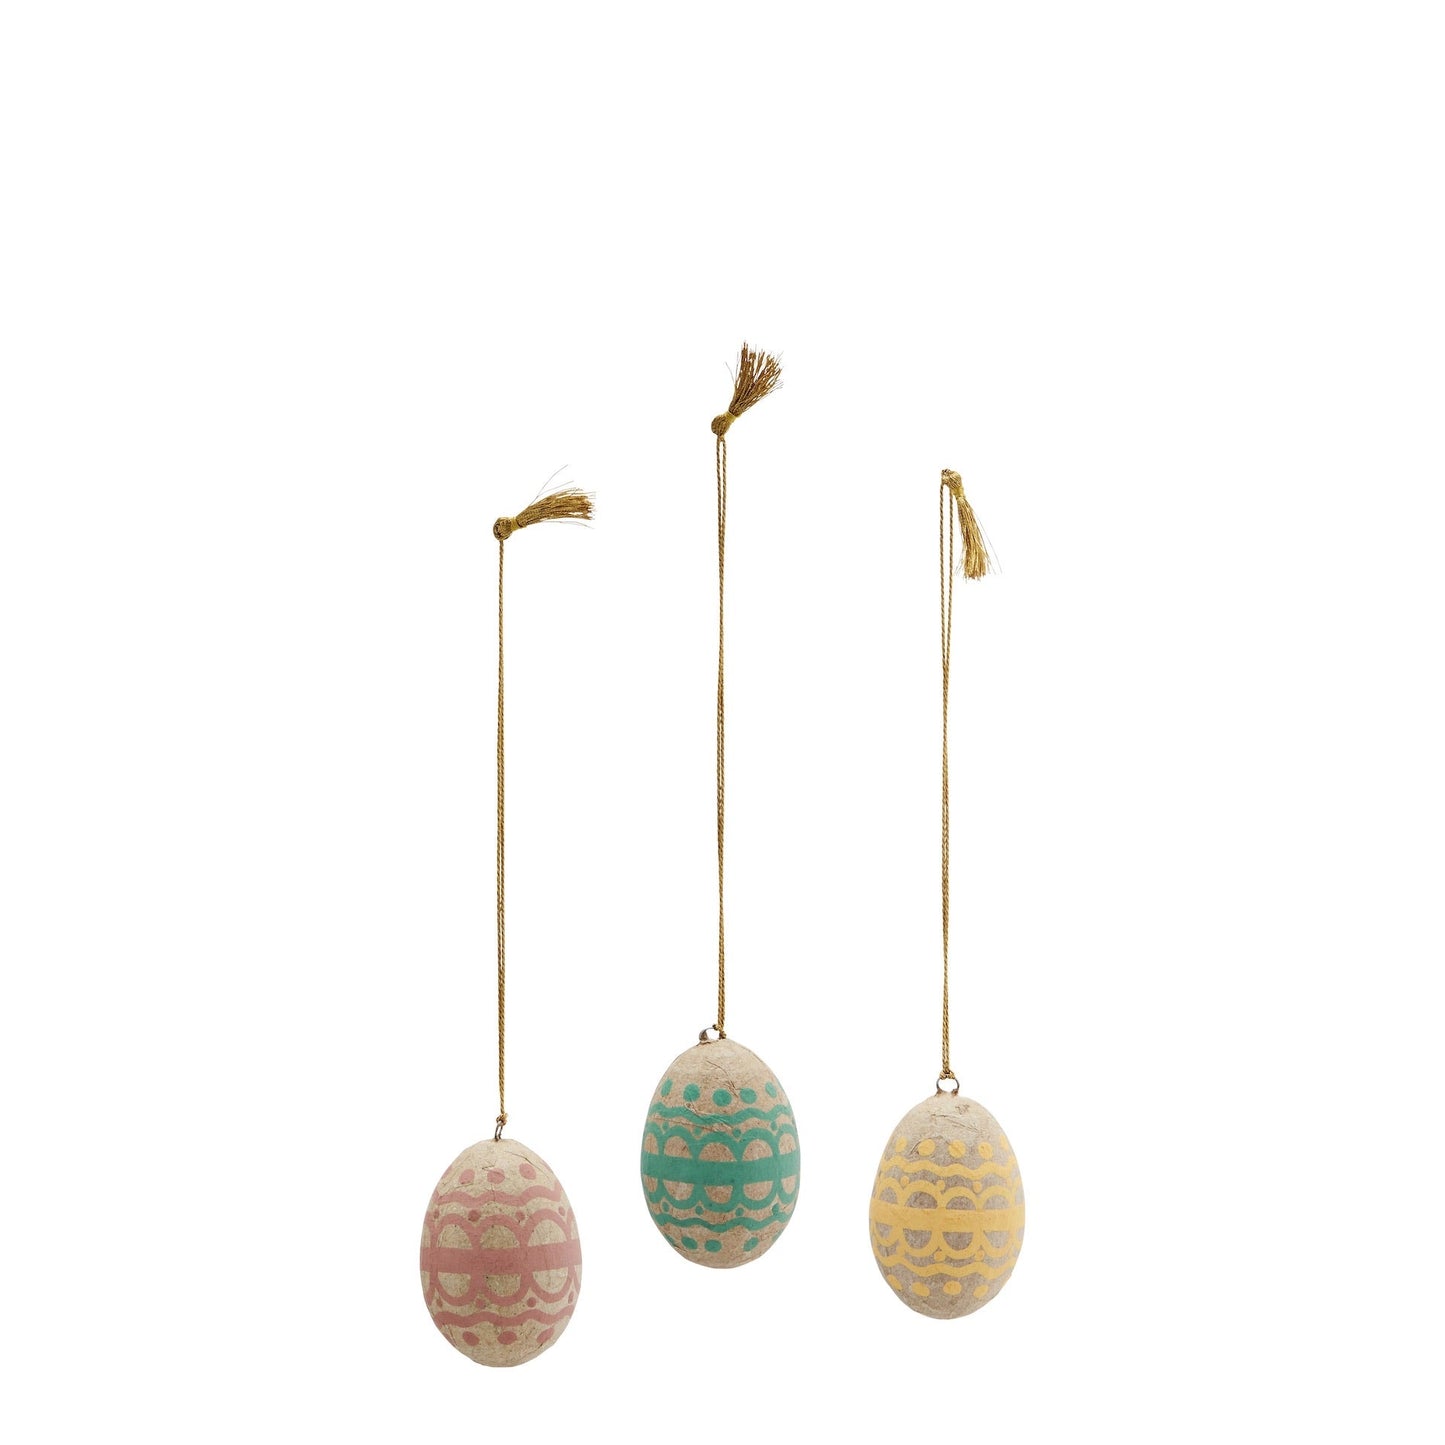 Hand-painted Paper Mache Egg Easter Decorations - Ivy Nook